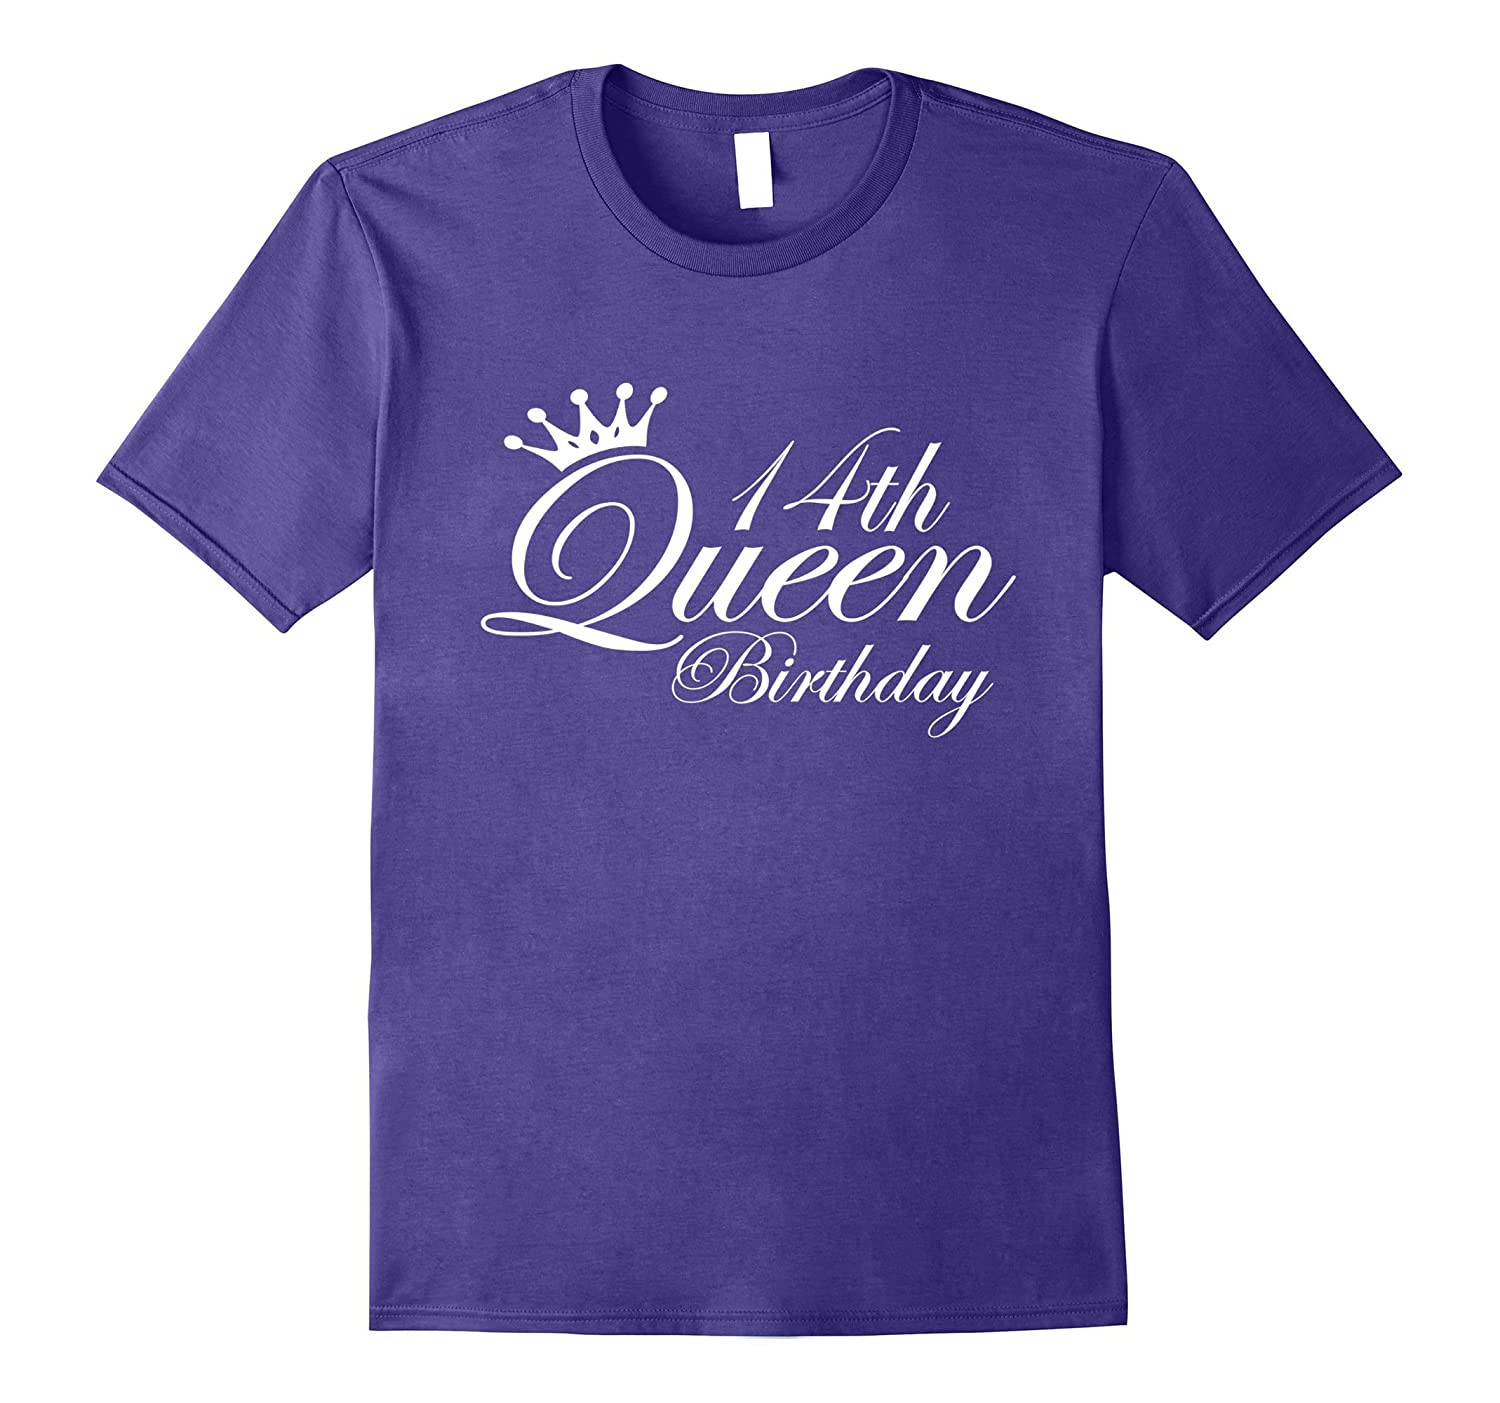 14 Year Old Birthday Gift Ideas
 14th Queen 14 Year Old 14th Birthday Gift Ideas for Her